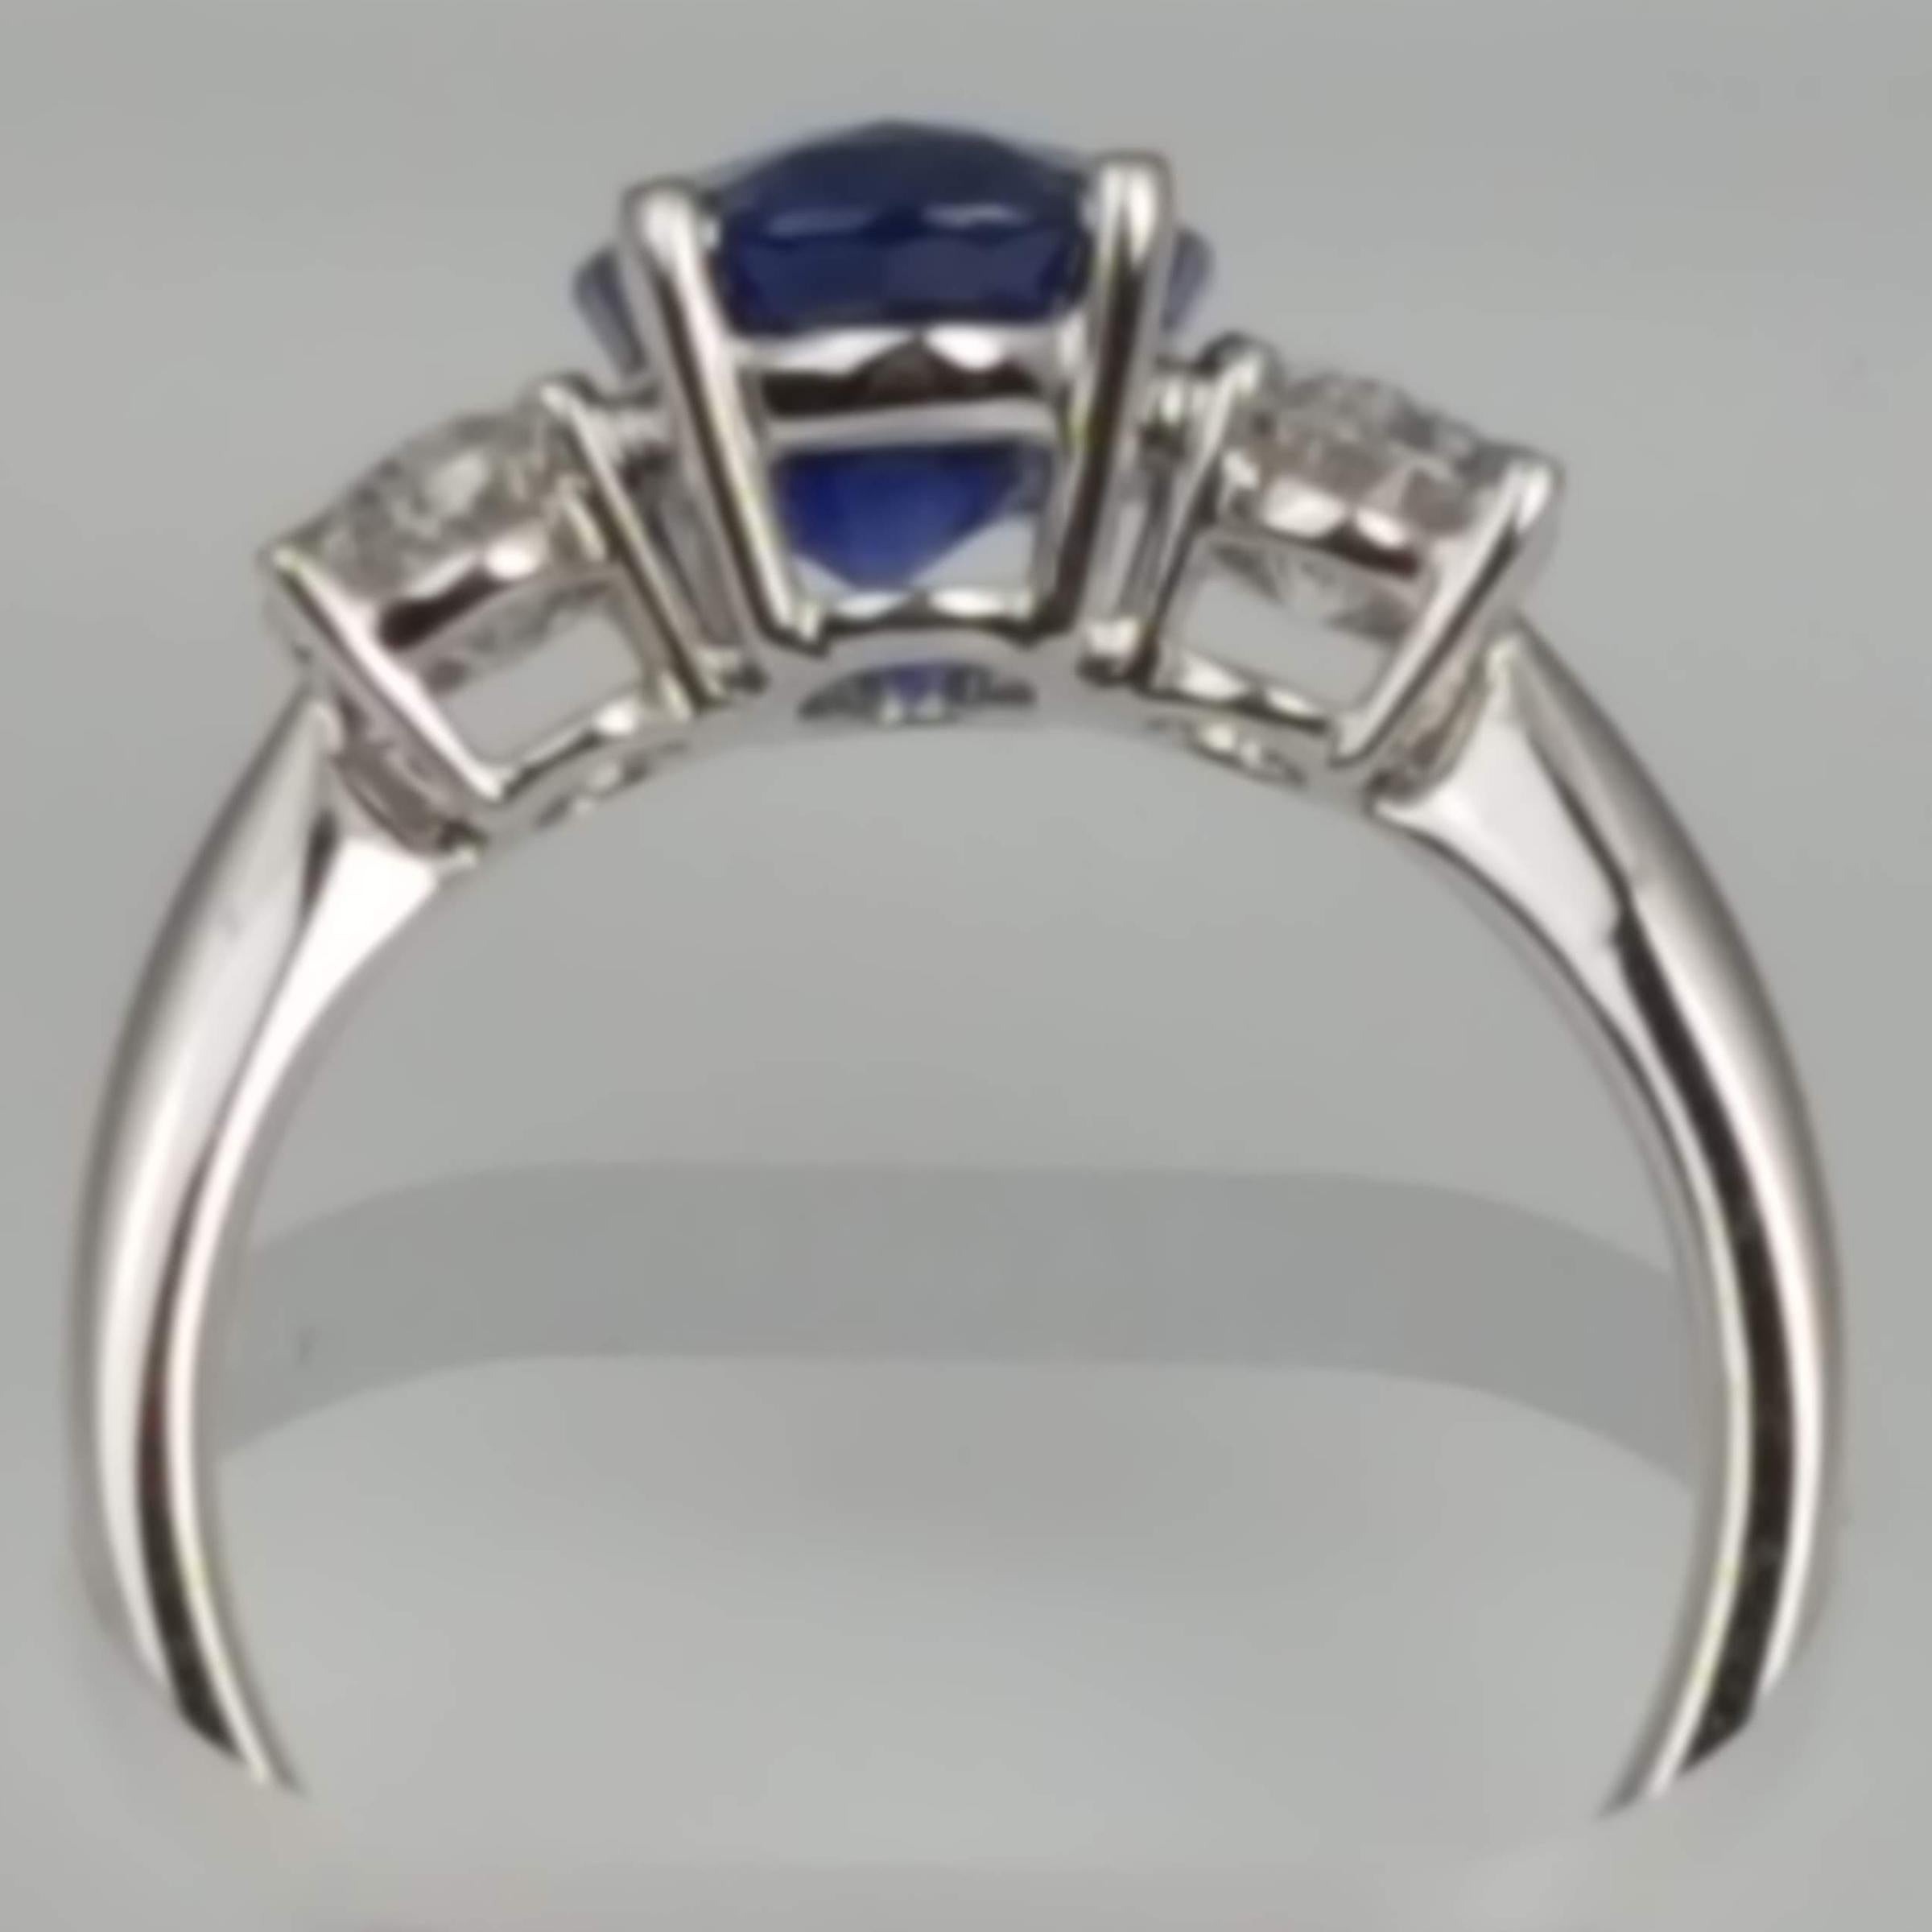 With a GIA Certified 3.16 carat oval cut blue Ceylon sapphire center, set between two oval cut diamonds (total diamond weight 0.87 carats), this ring shines from every angle.

GIA Certification details (see photo):
The center sapphire is